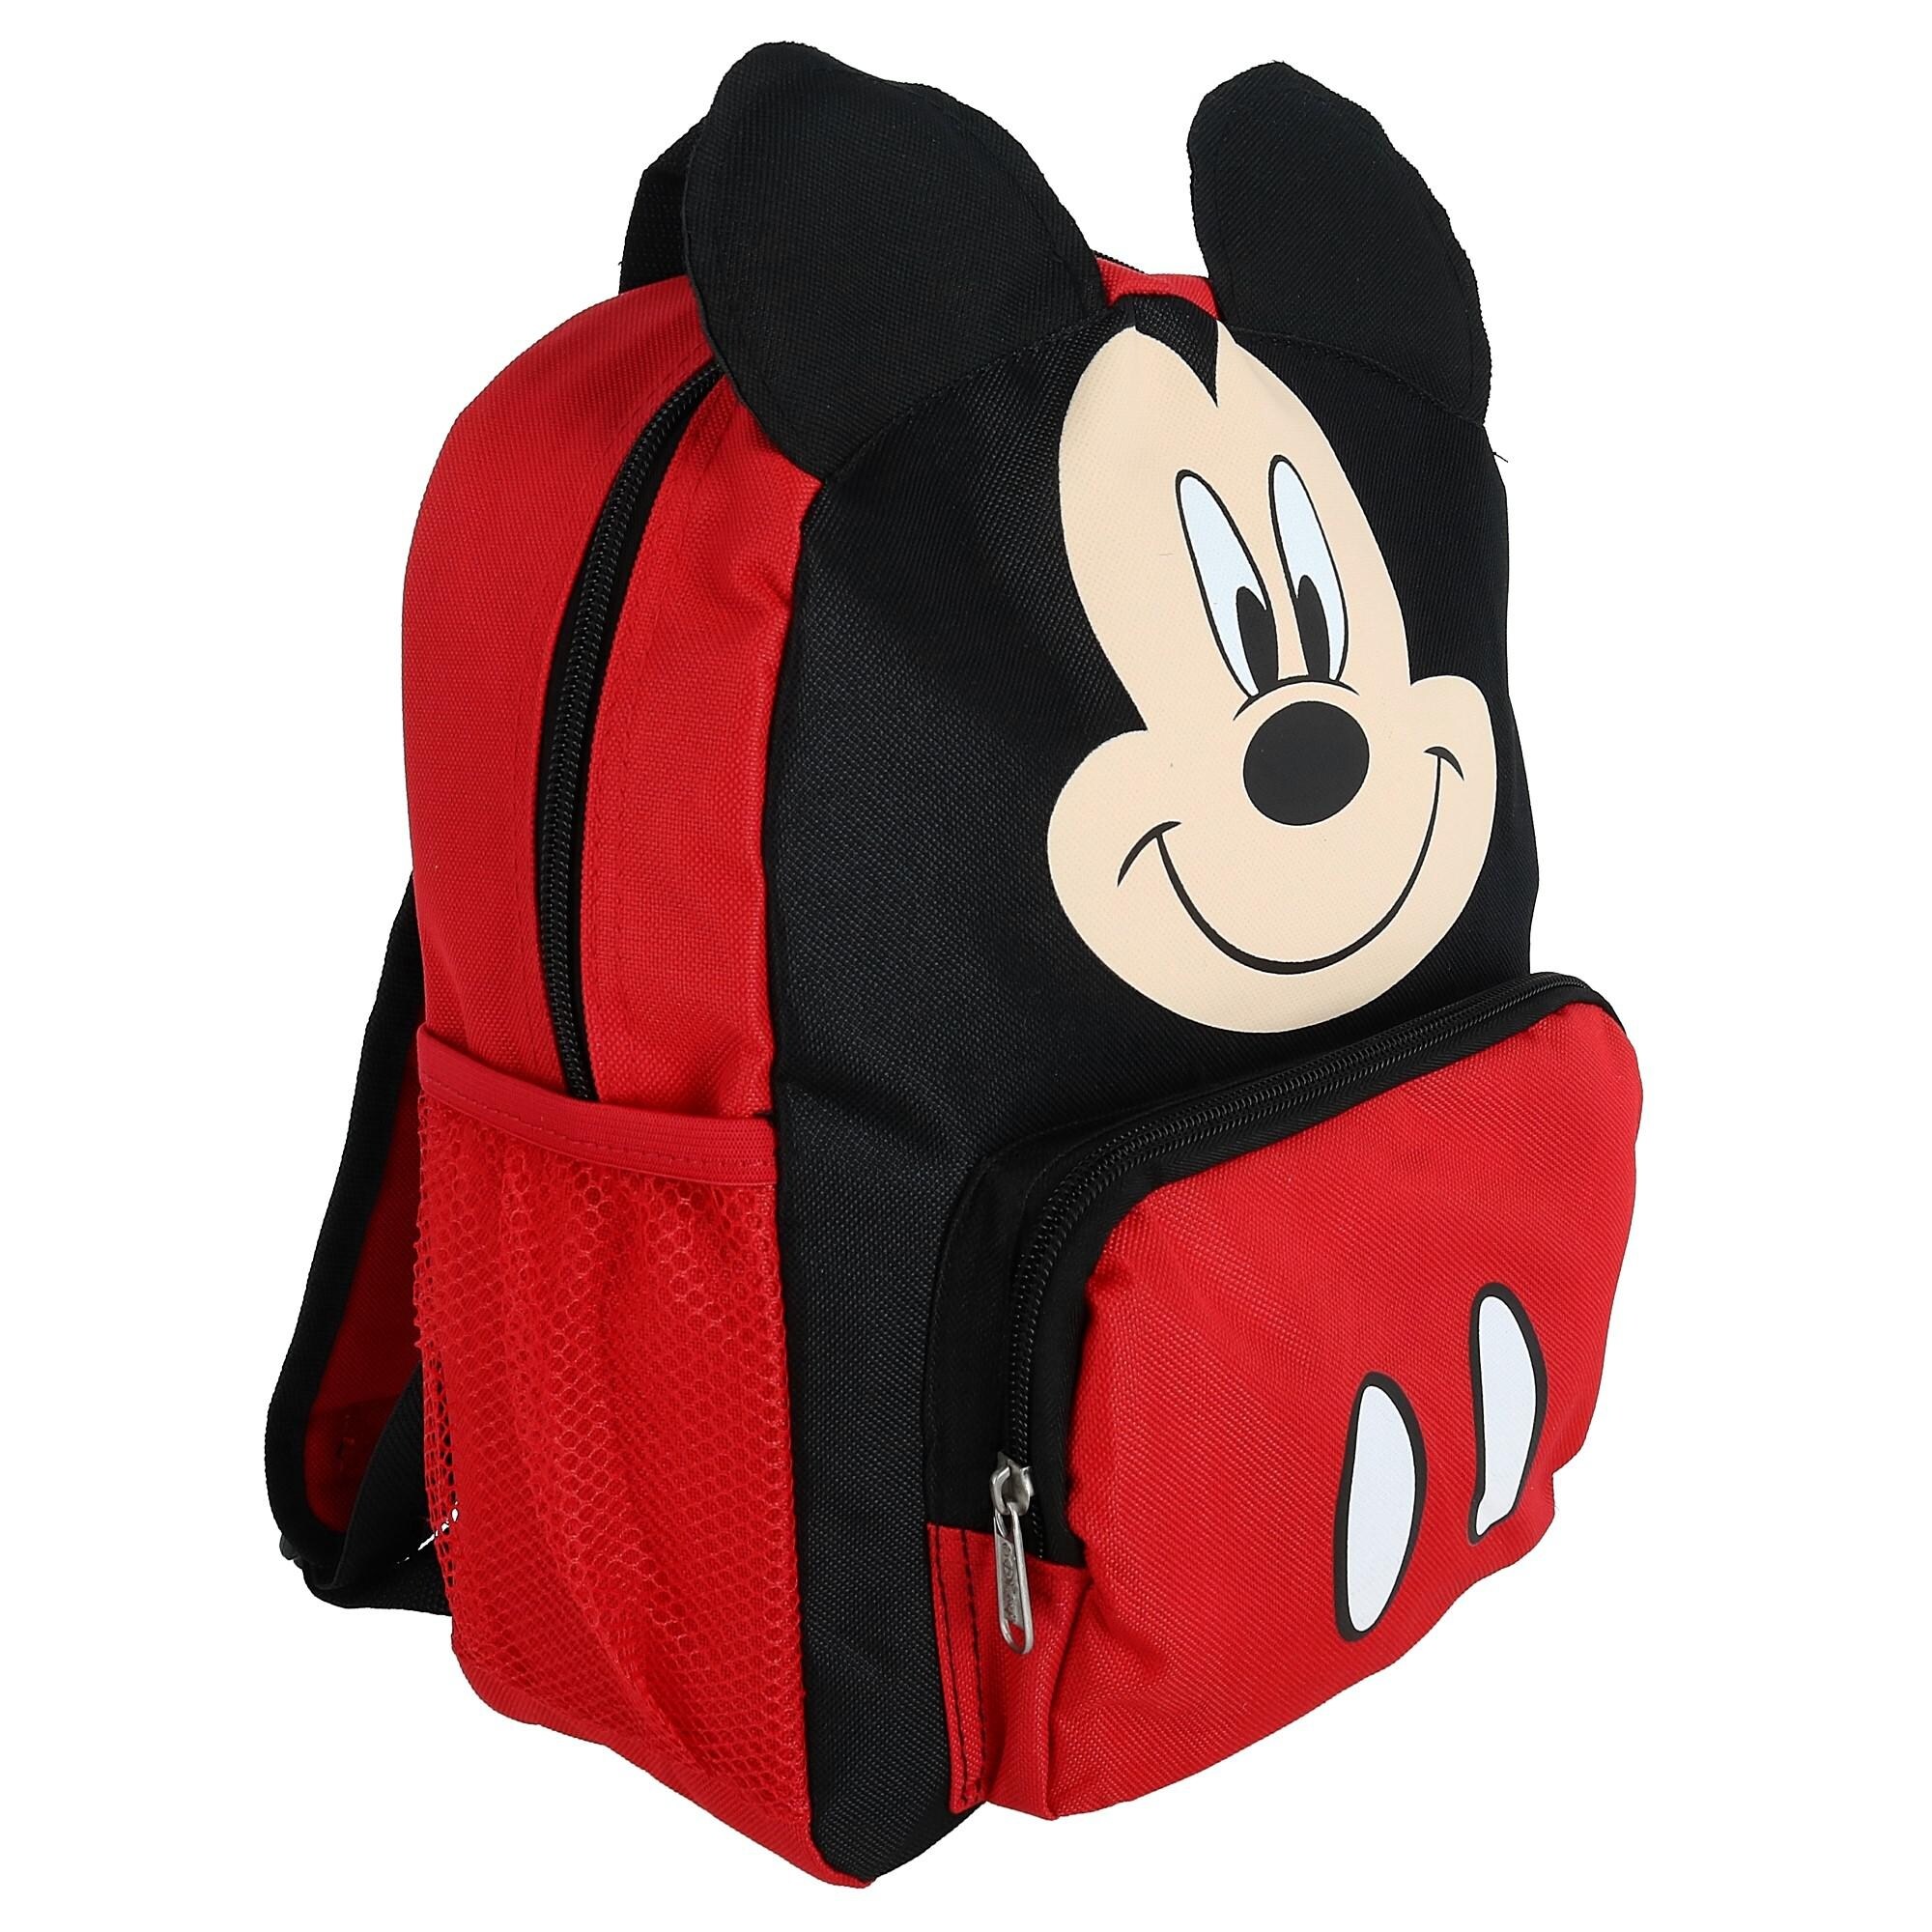 New Disney Kids' 12-inch Big Face Mickey Mouse Backpack 